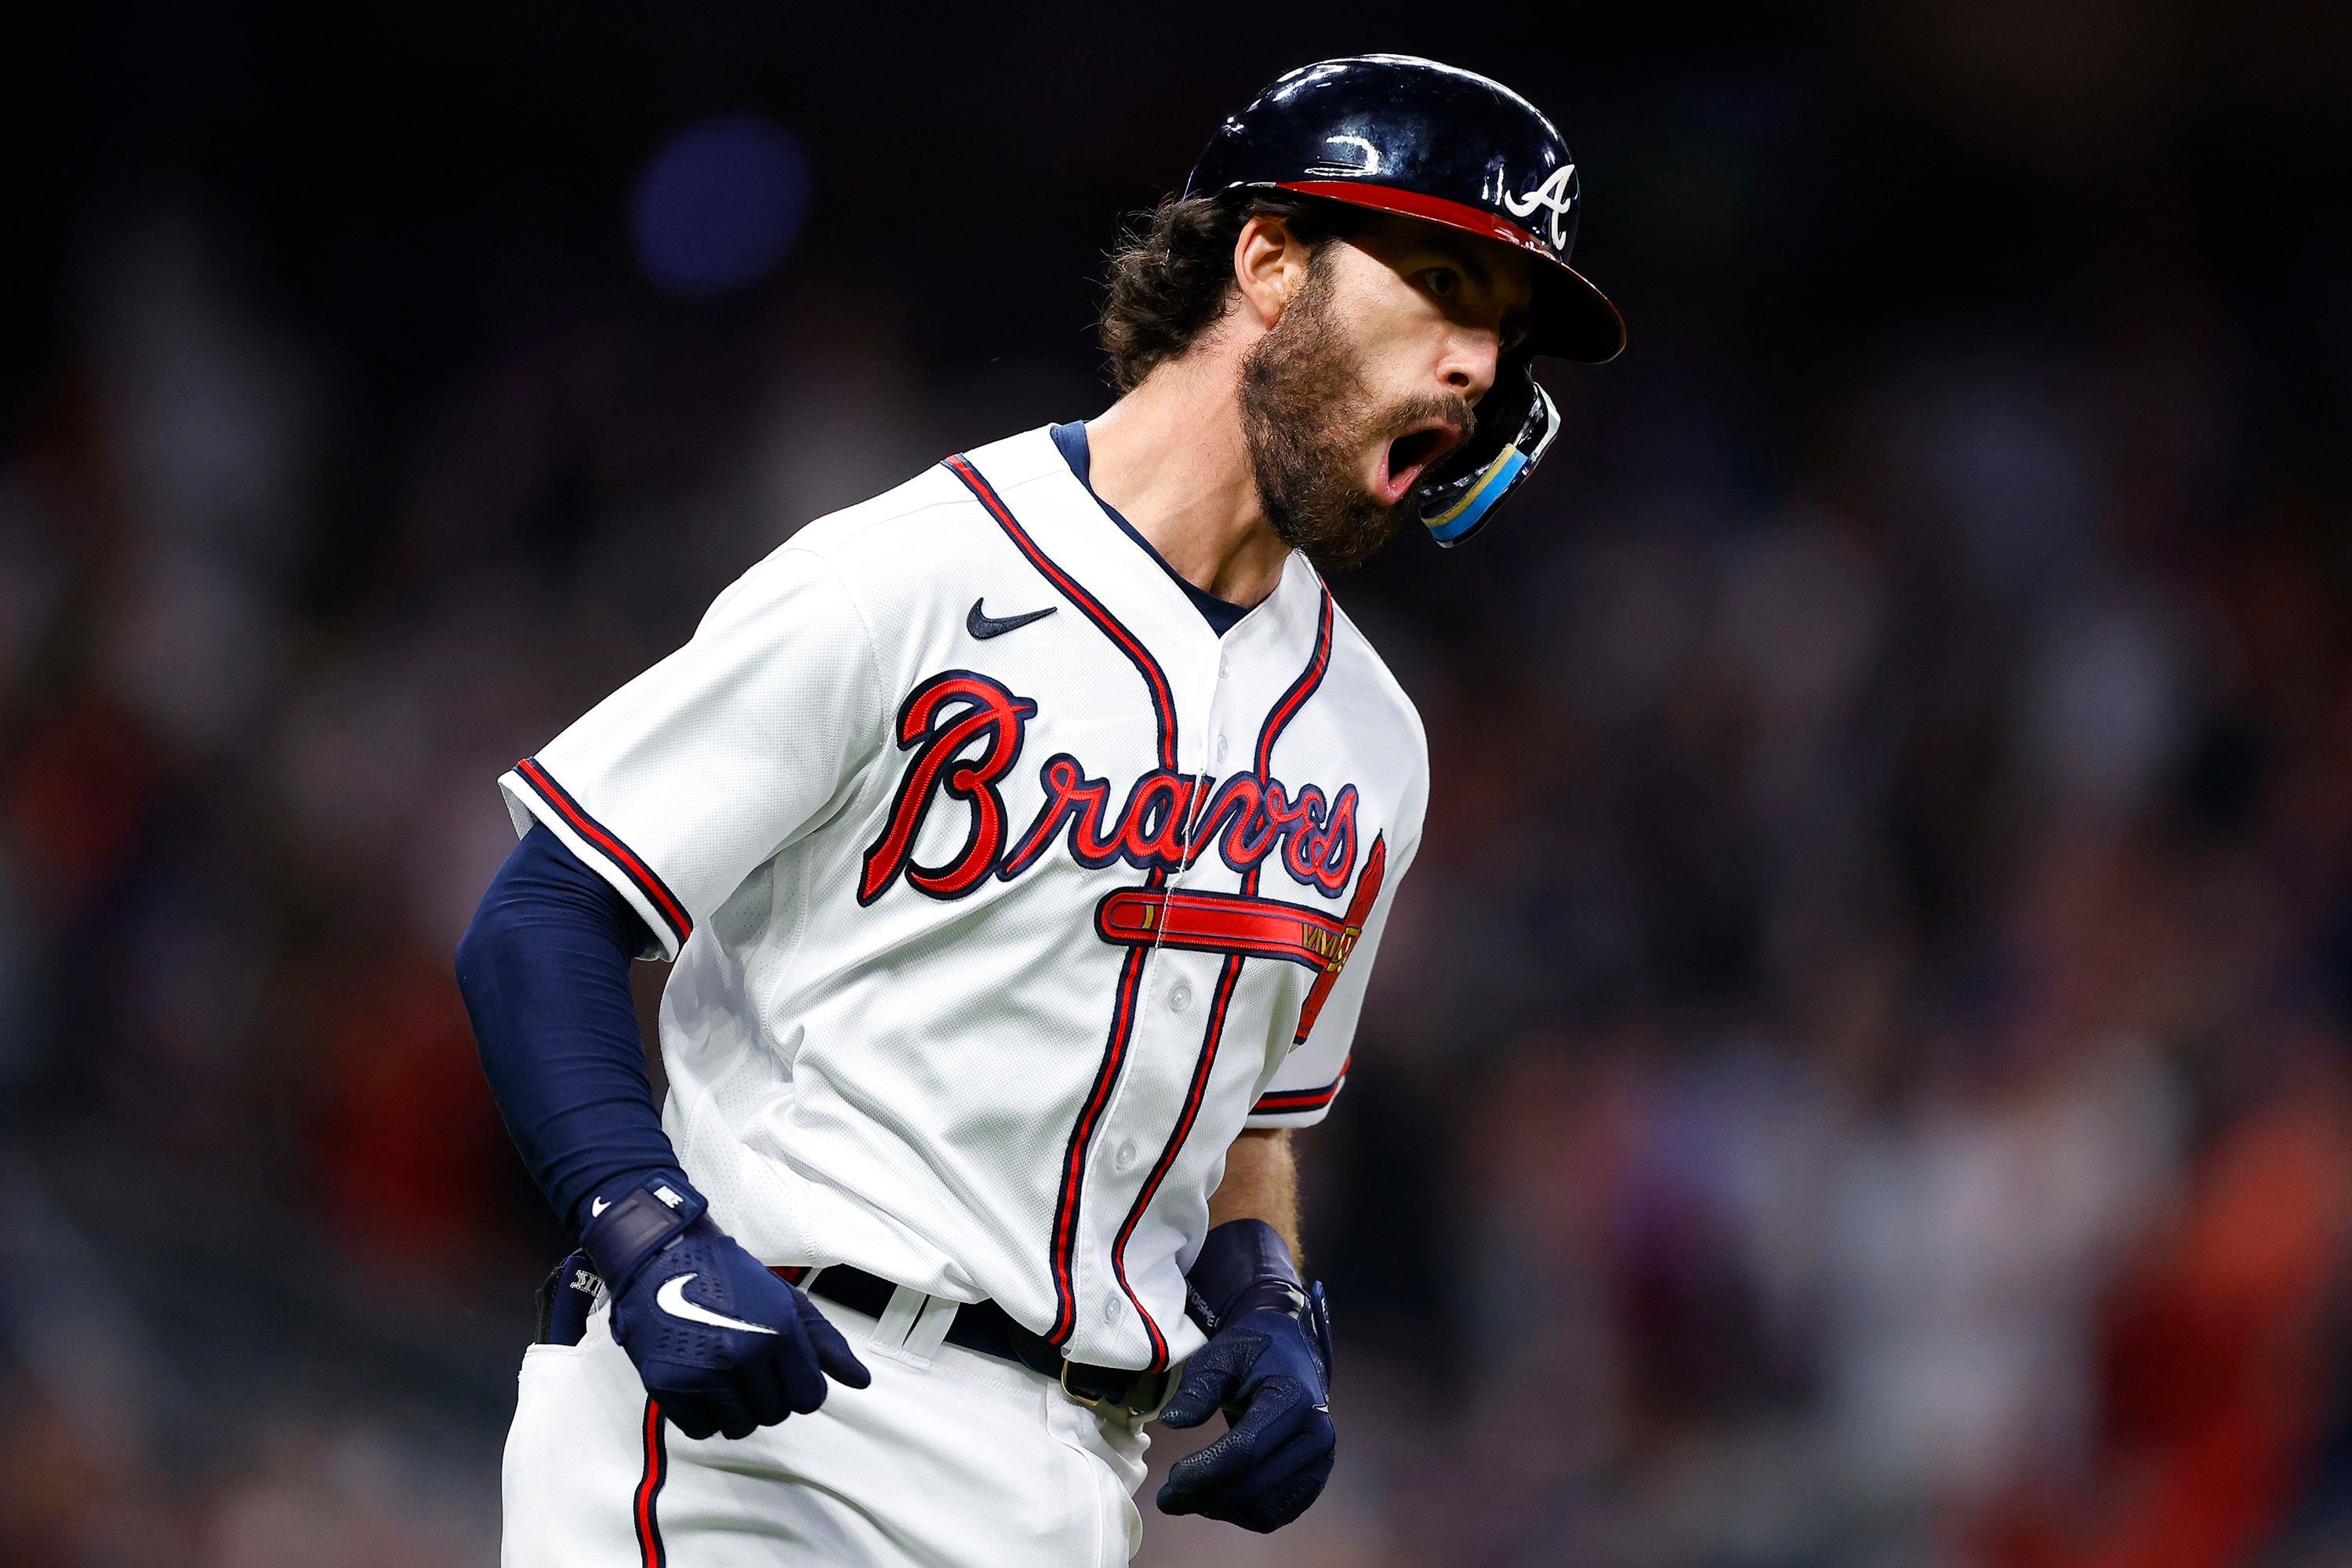 Phillies shortstop search: Dansby Swanson is elite on defense and a leader,  but he's a streaky hitter